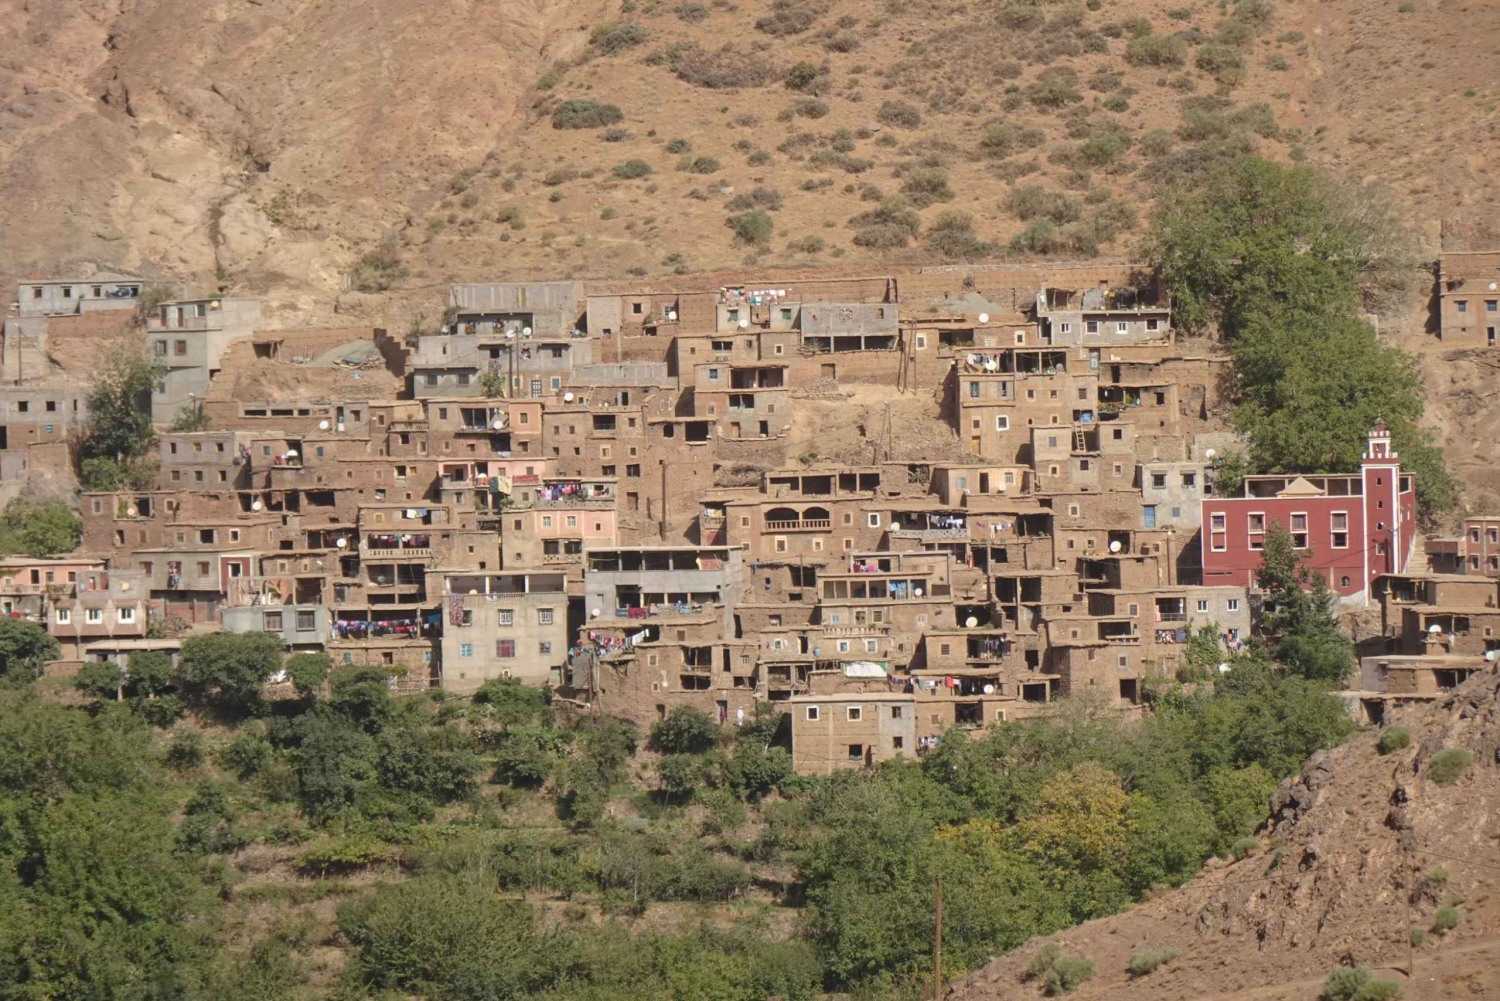 Marrakech: Day Trip to Atlas Mountains and Berber Villages